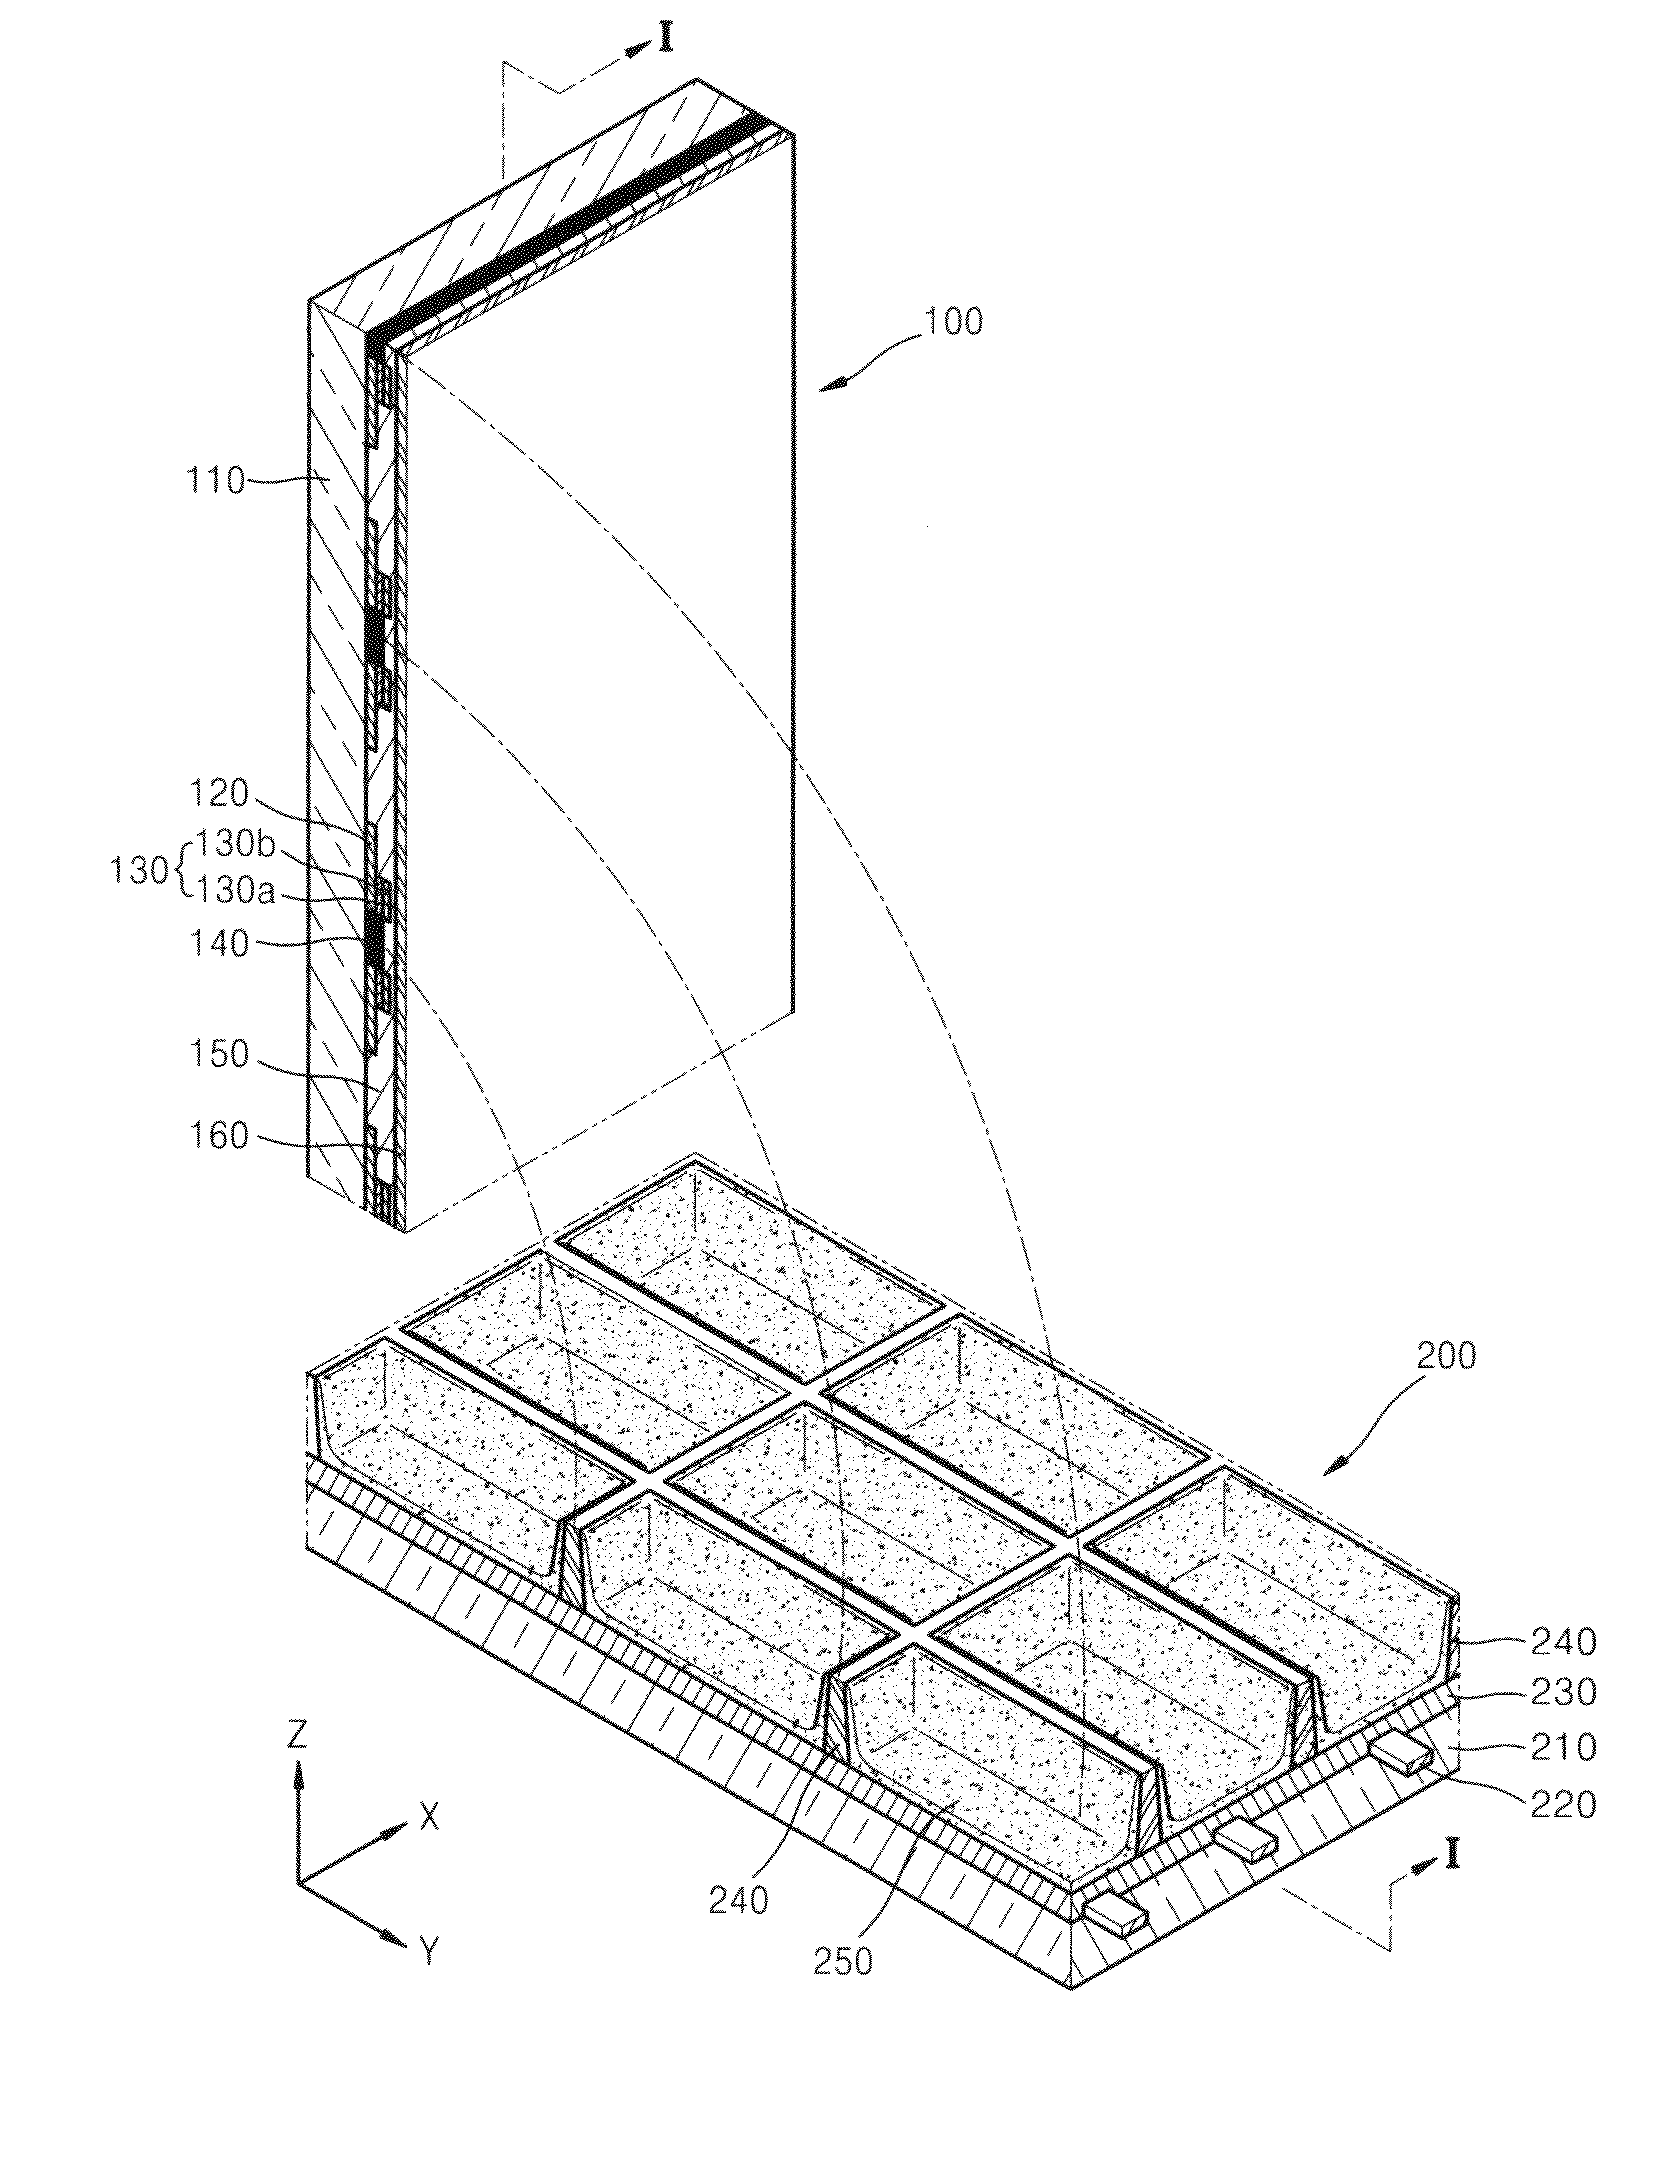 Substrate structure for plasma display panel, method of manufacturing the substrate structure, and plasma display panel including the substrate structure